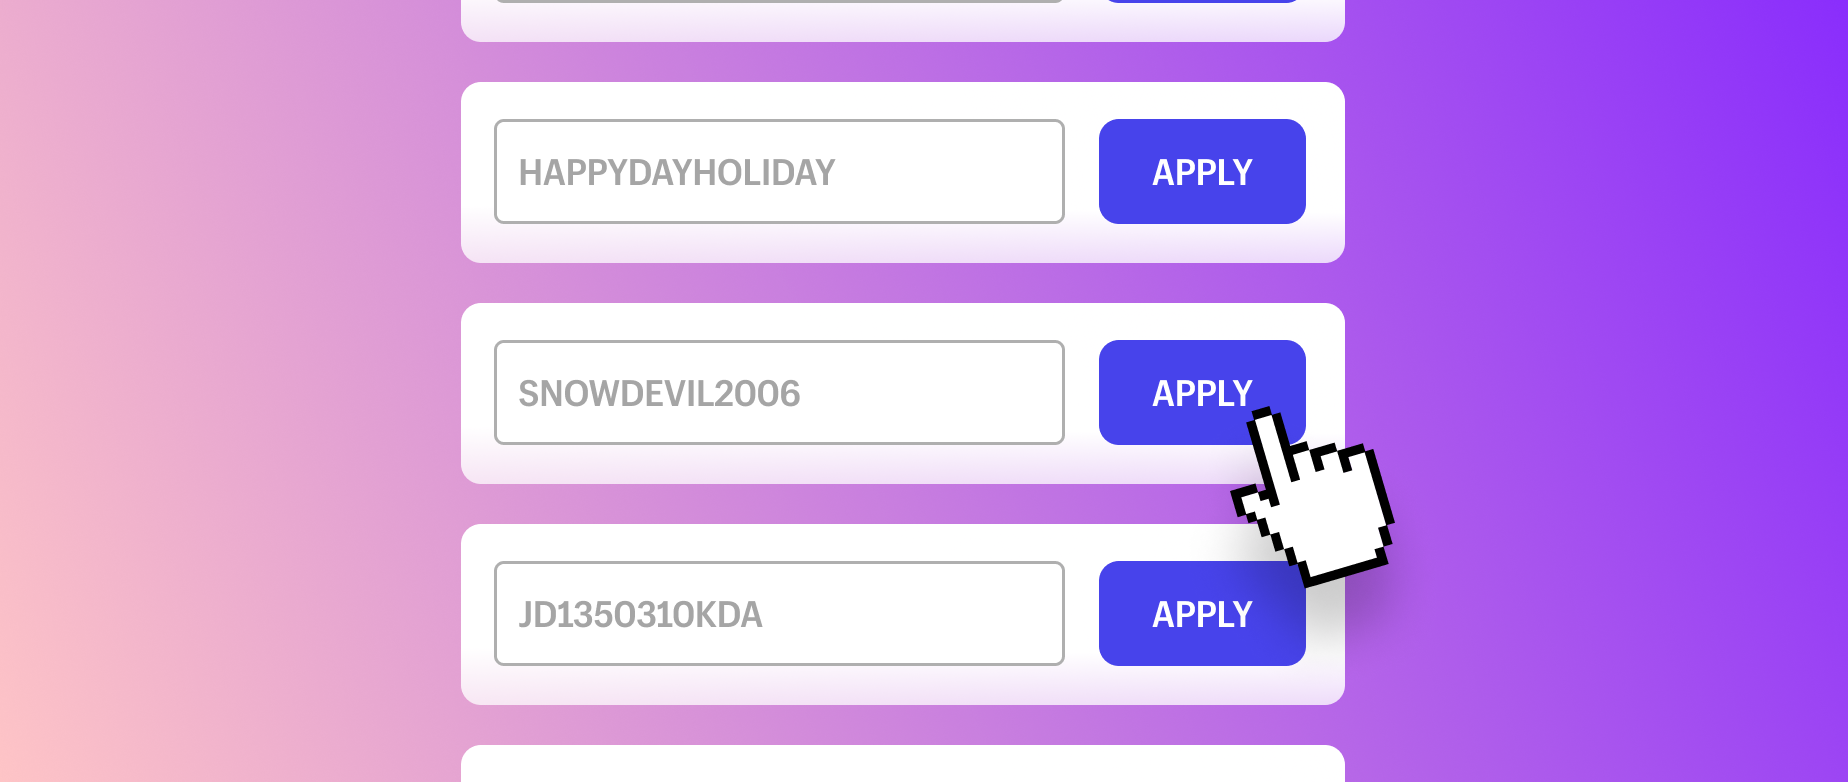 Three holiday promotion codes to apply with a cursor on a pink purple background.